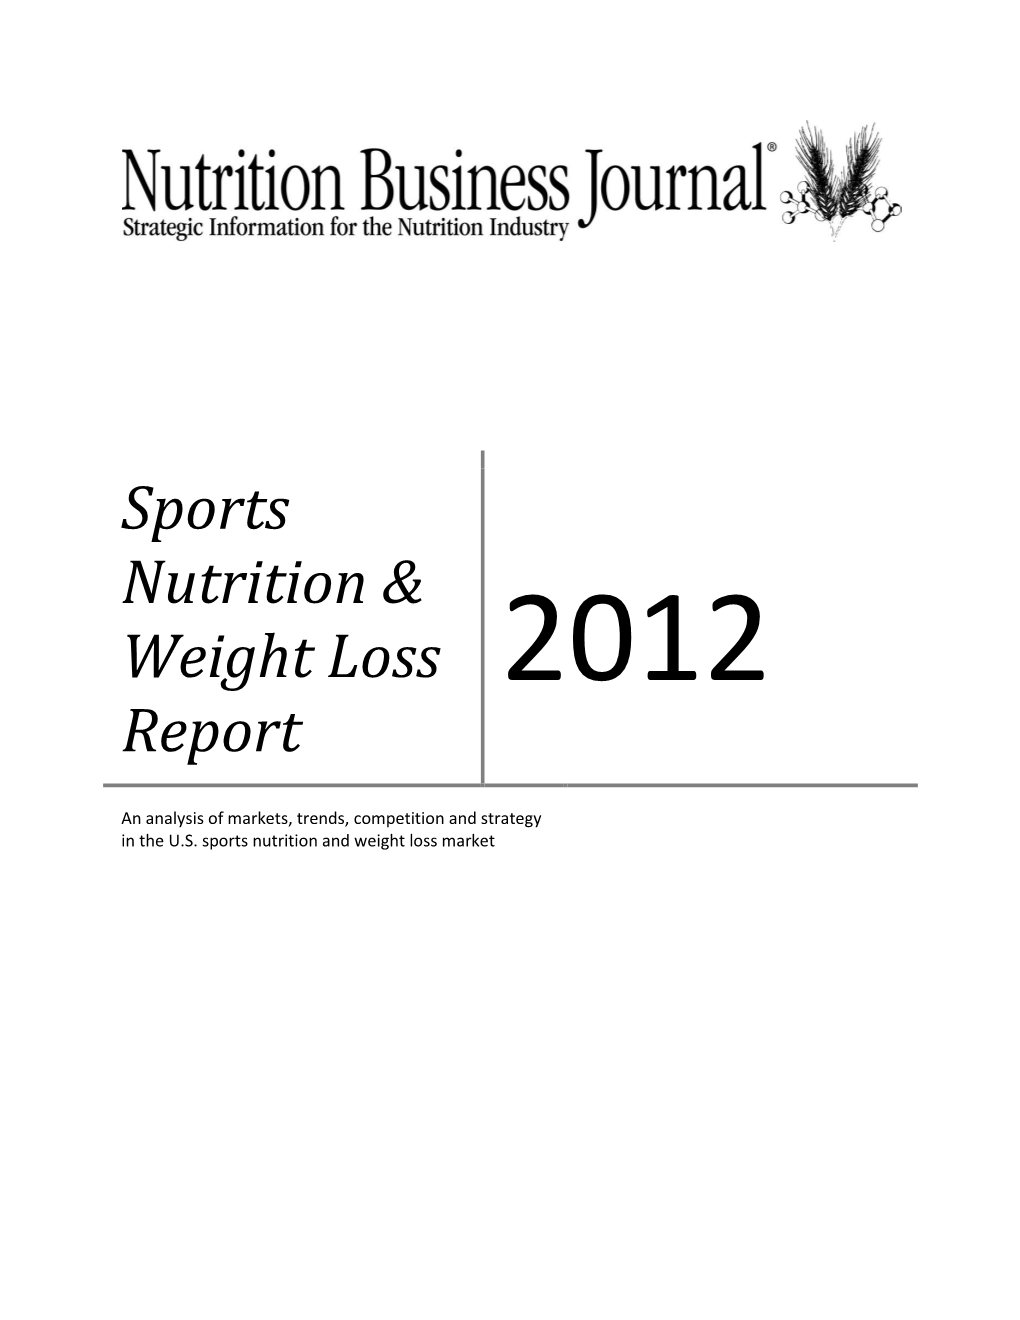 Sports Nutrition & Weight Loss Report